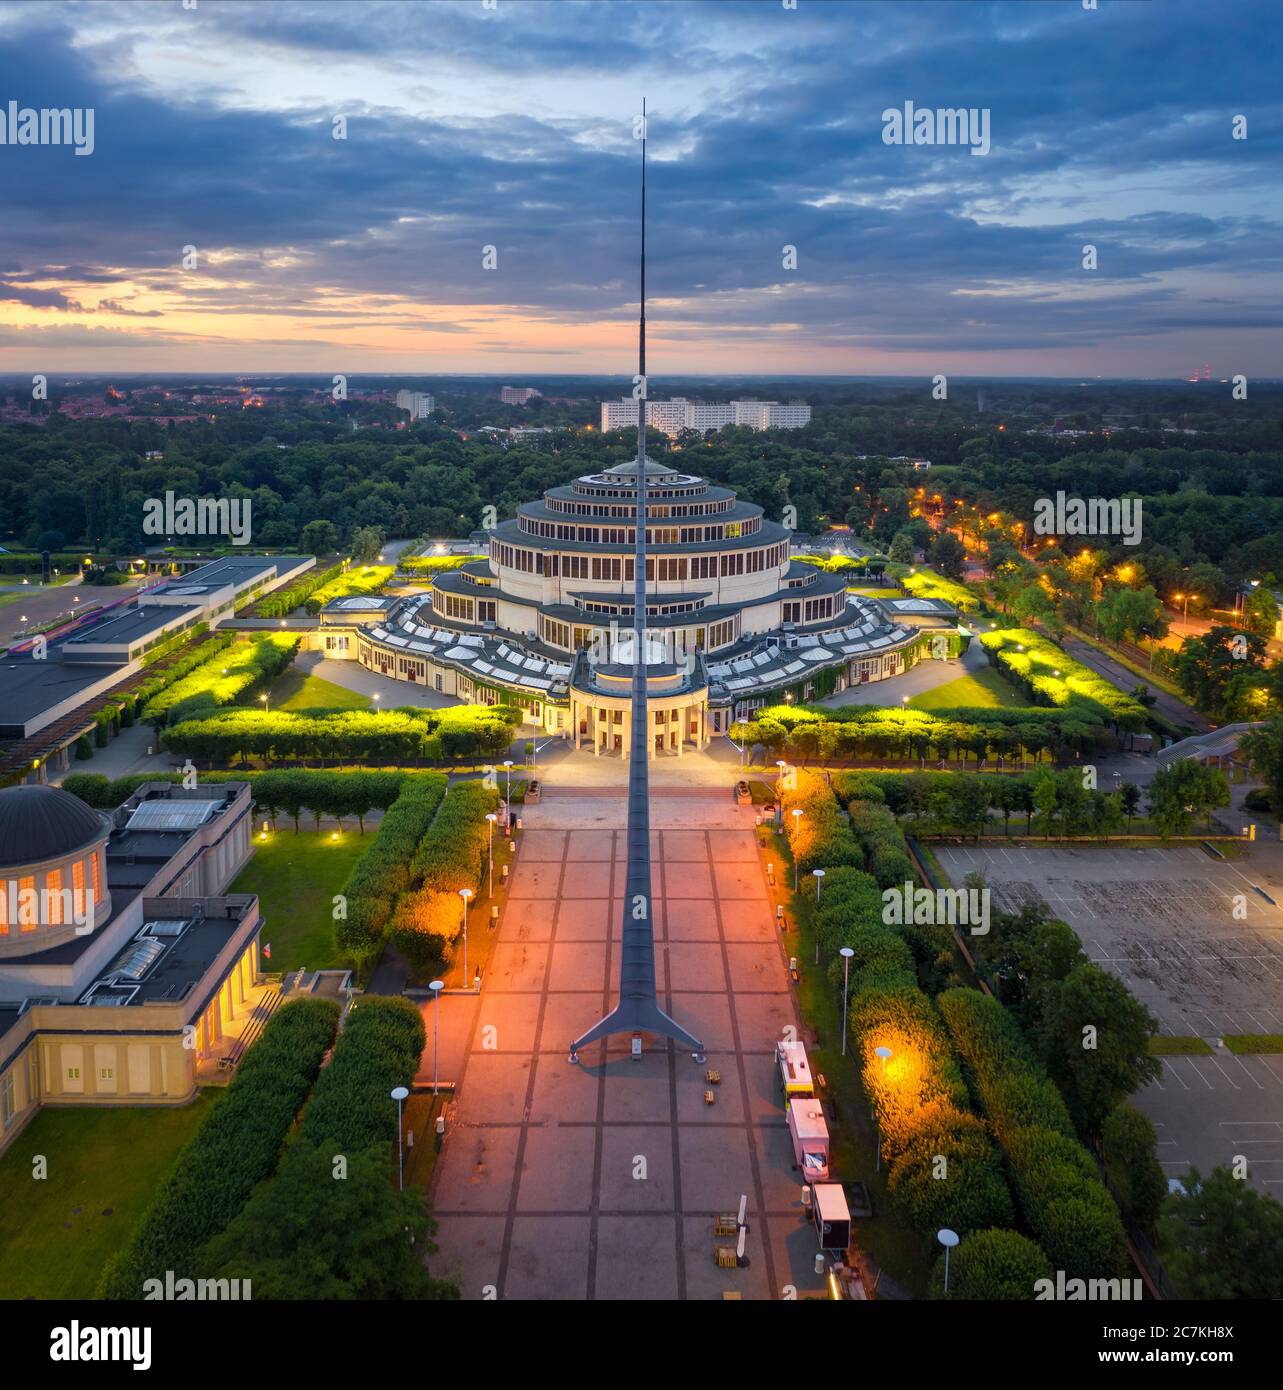 Wroclaw, Poland. Aerial view of Centennial Hall (Hala Stulecia) - historic building used for exhibitions and concerts Stock Photo